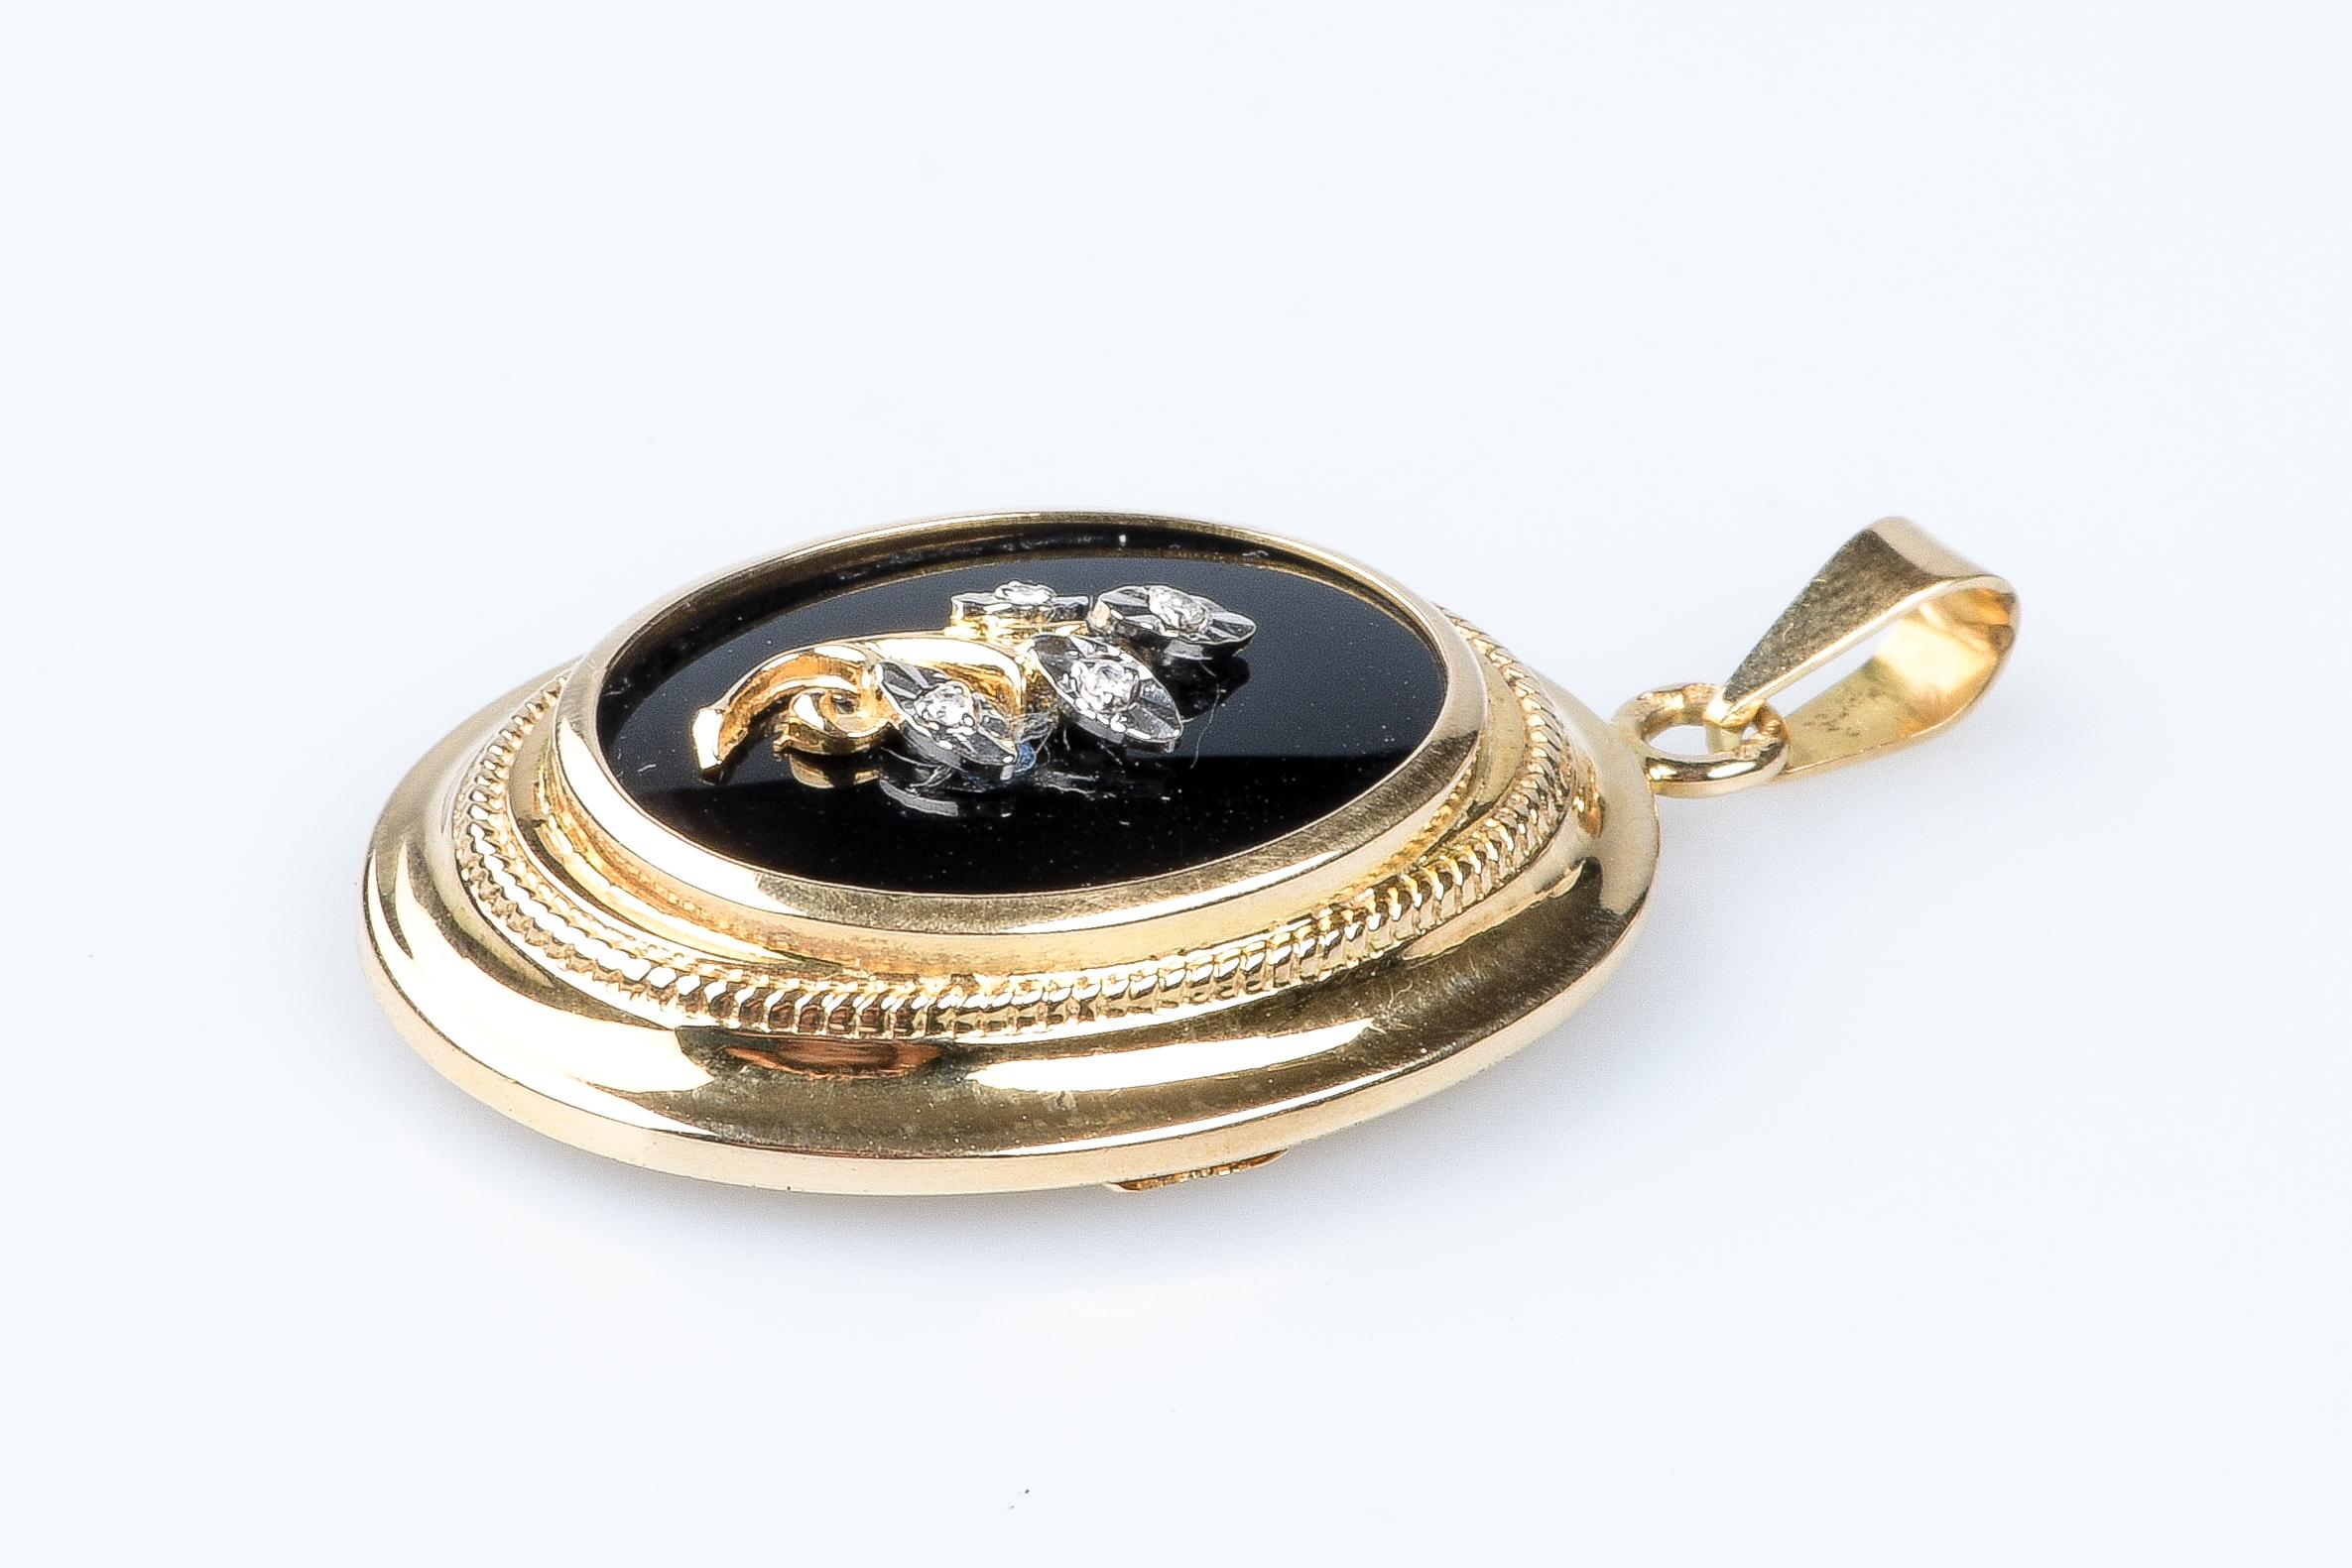 18 carat yellow gold pendant designed with with 1 onyx and 4 zirconium oxides.

Weight: 6.44 gr. 

Dimensions : 3.90 x 2.26 x 0.86 cm 

Jewel delivered with a luxurious box. 

Condition : Like new

18 carat gold eagle head hallmark on the jewel.